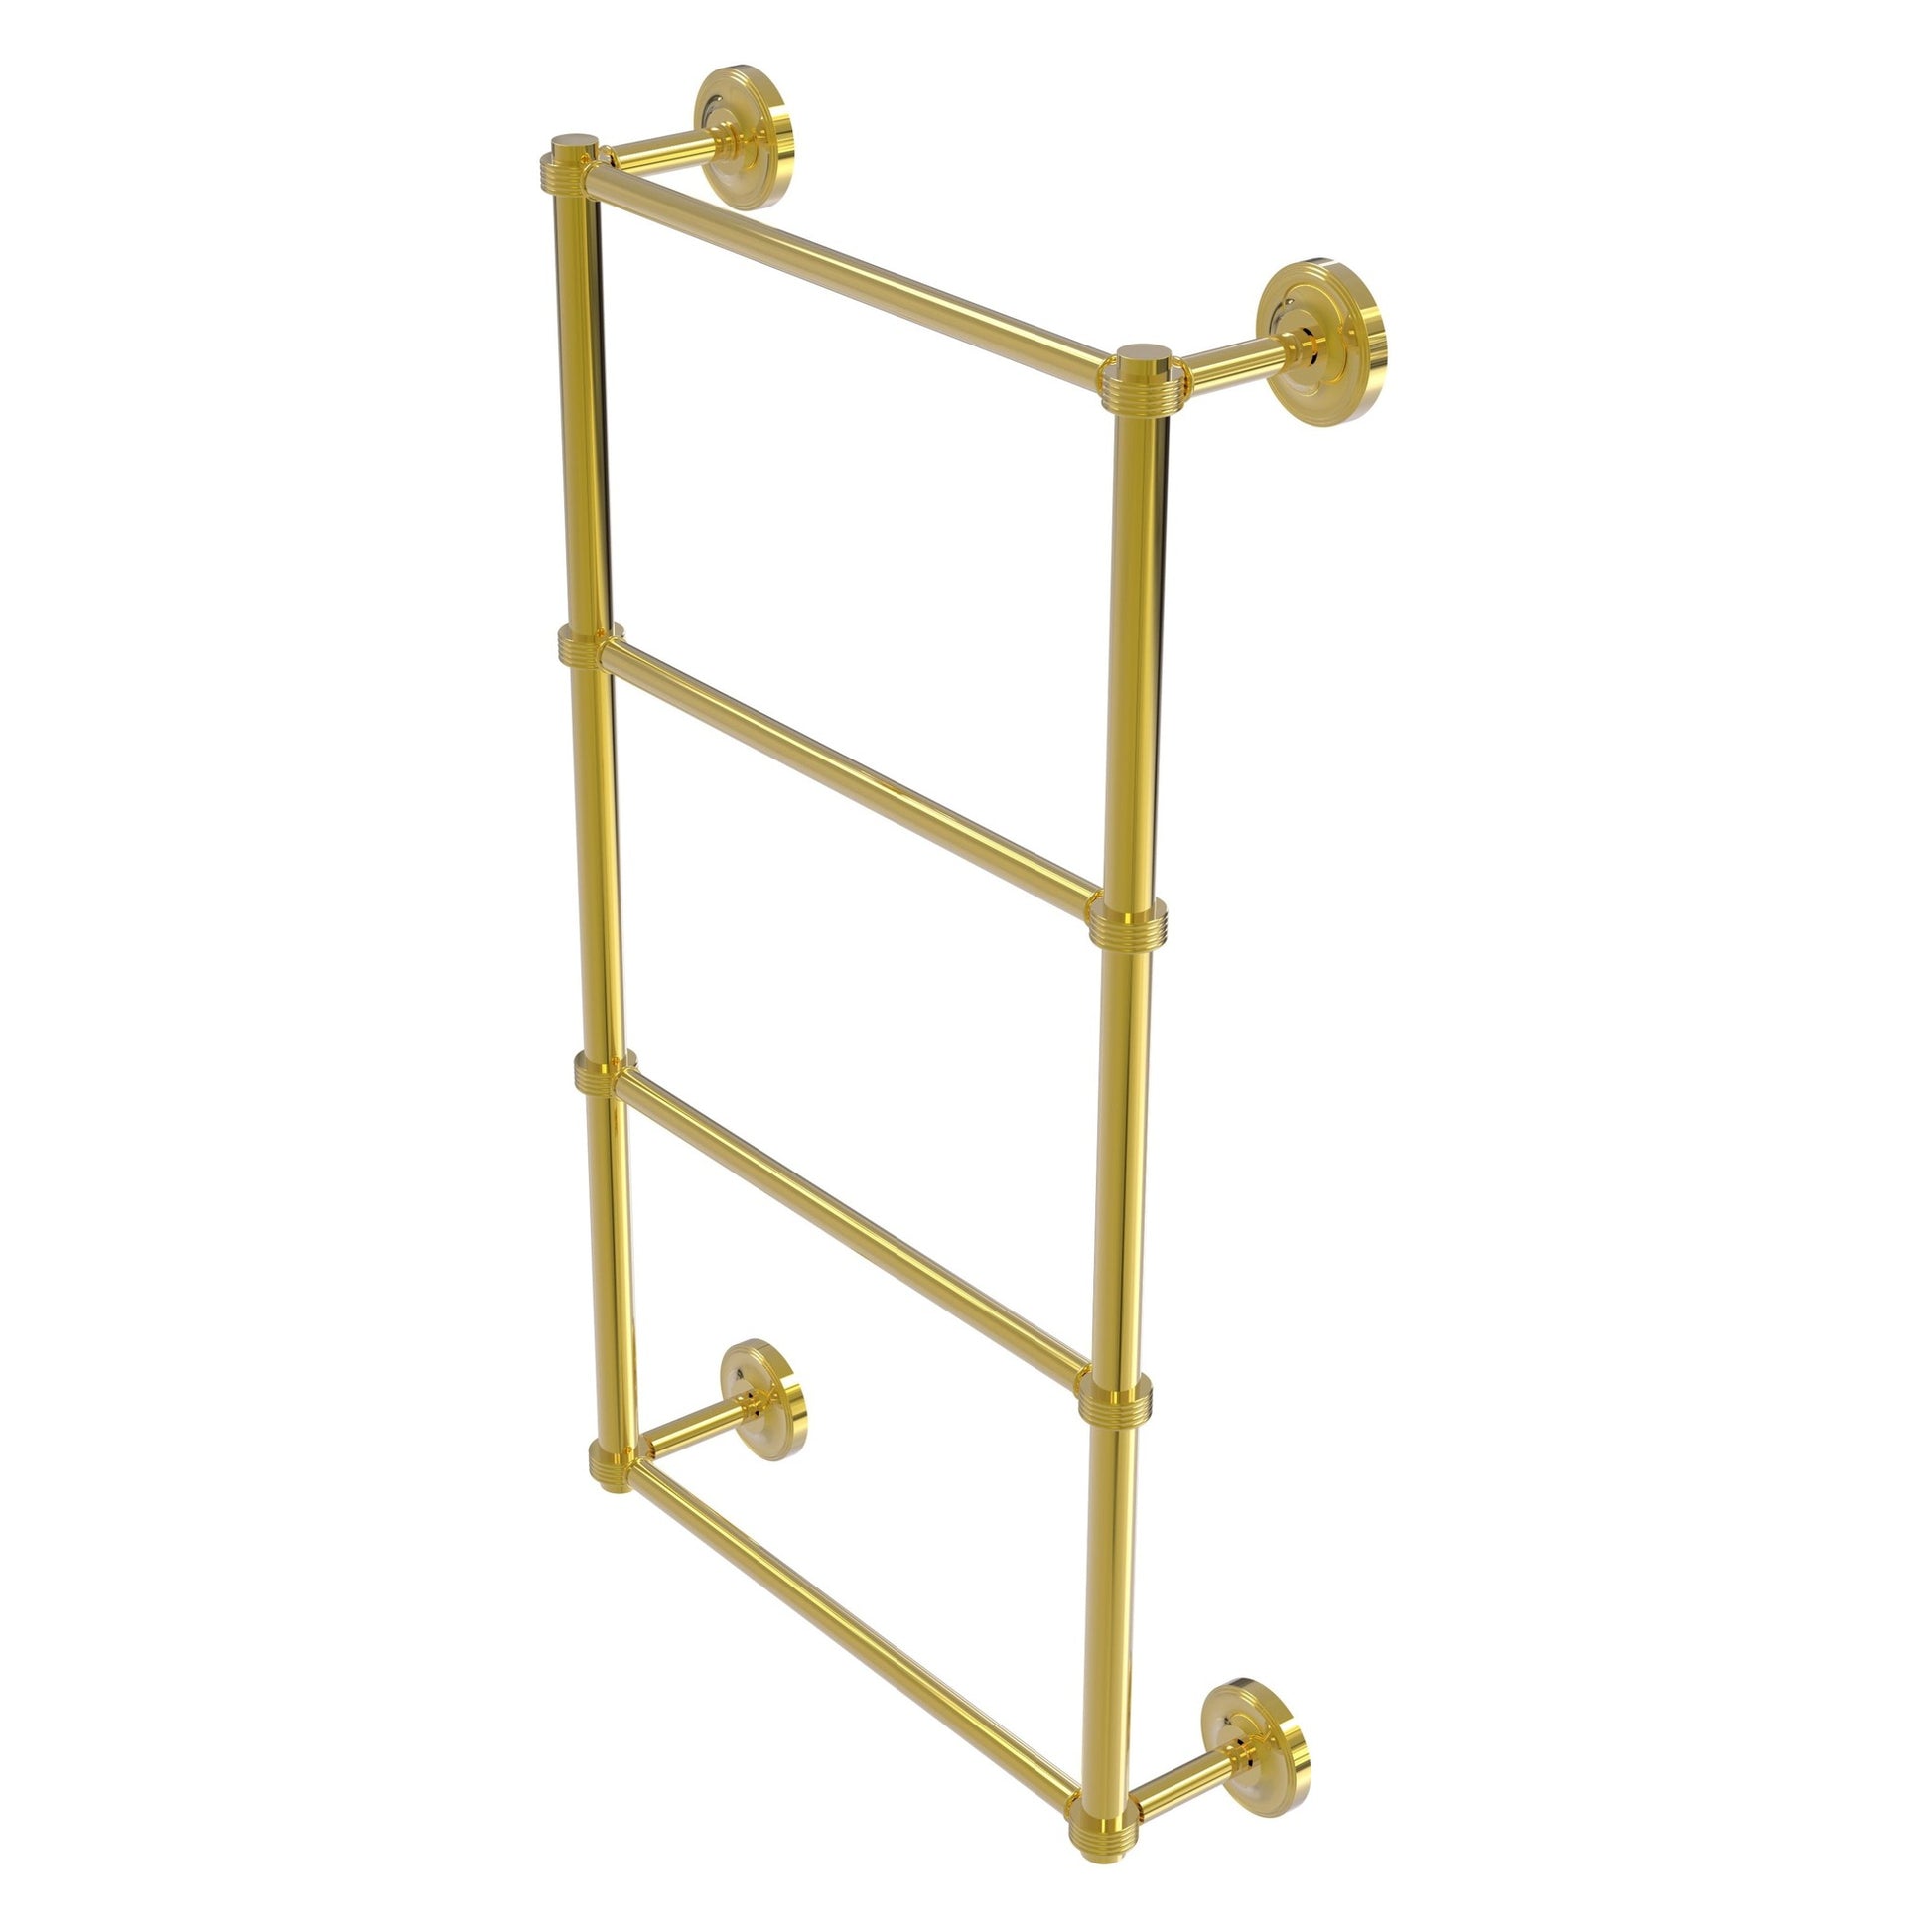 Allied Brass Prestige Regal 30" x 5.4" Polished Brass Solid Brass 4-Tier 30 Inch Ladder Towel Bar With Grooved Detail